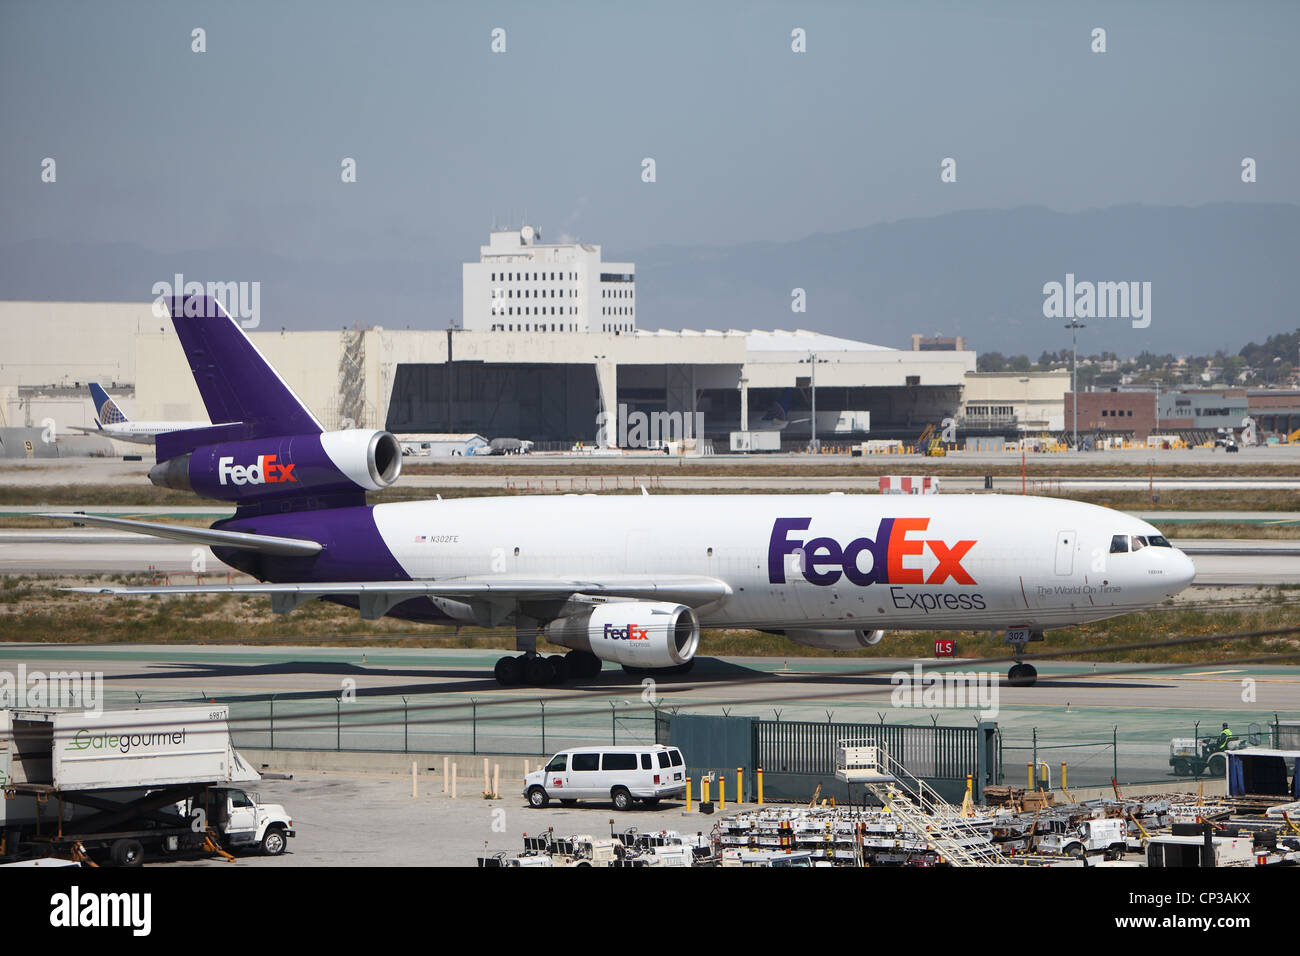 A FEDEX MD-10 cargo plane taxis to the terminal at Los Angeles Airport on April 15, 2012. The plane was upgraded from a DC-10 Stock Photo